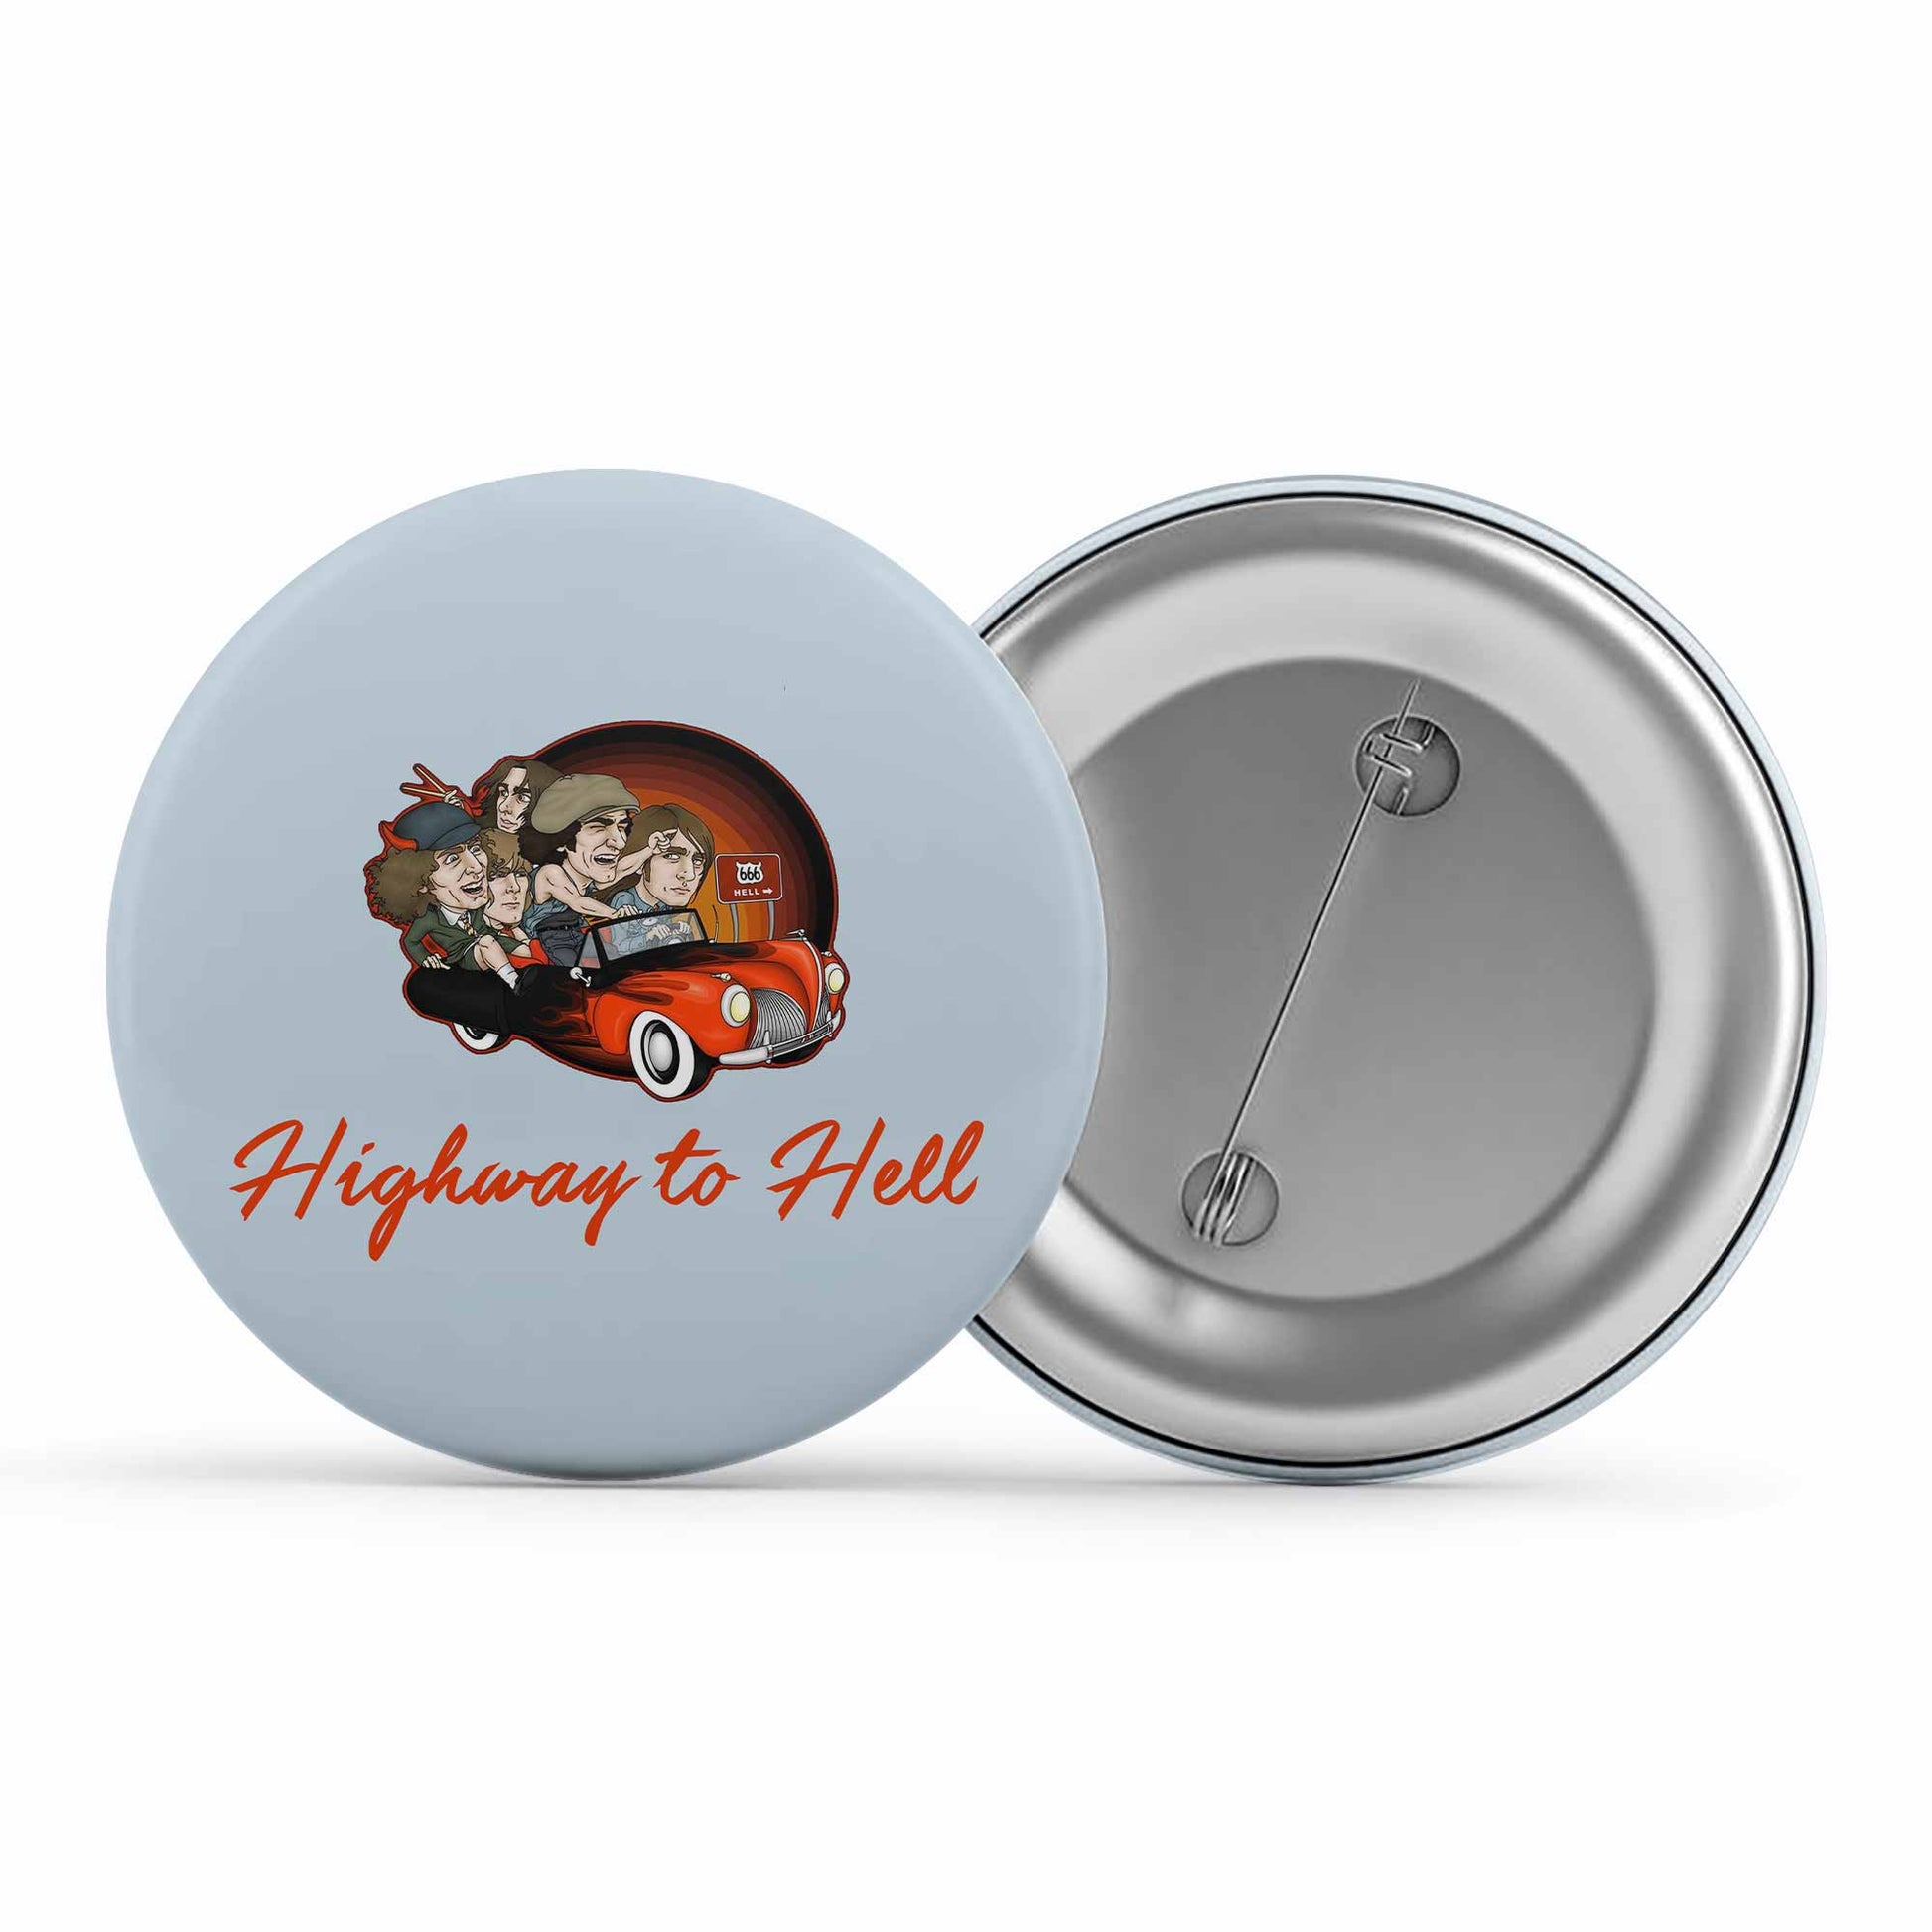 ac/dc highway to hell badge pin button music band buy online india the banyan tee tbt men women girls boys unisex